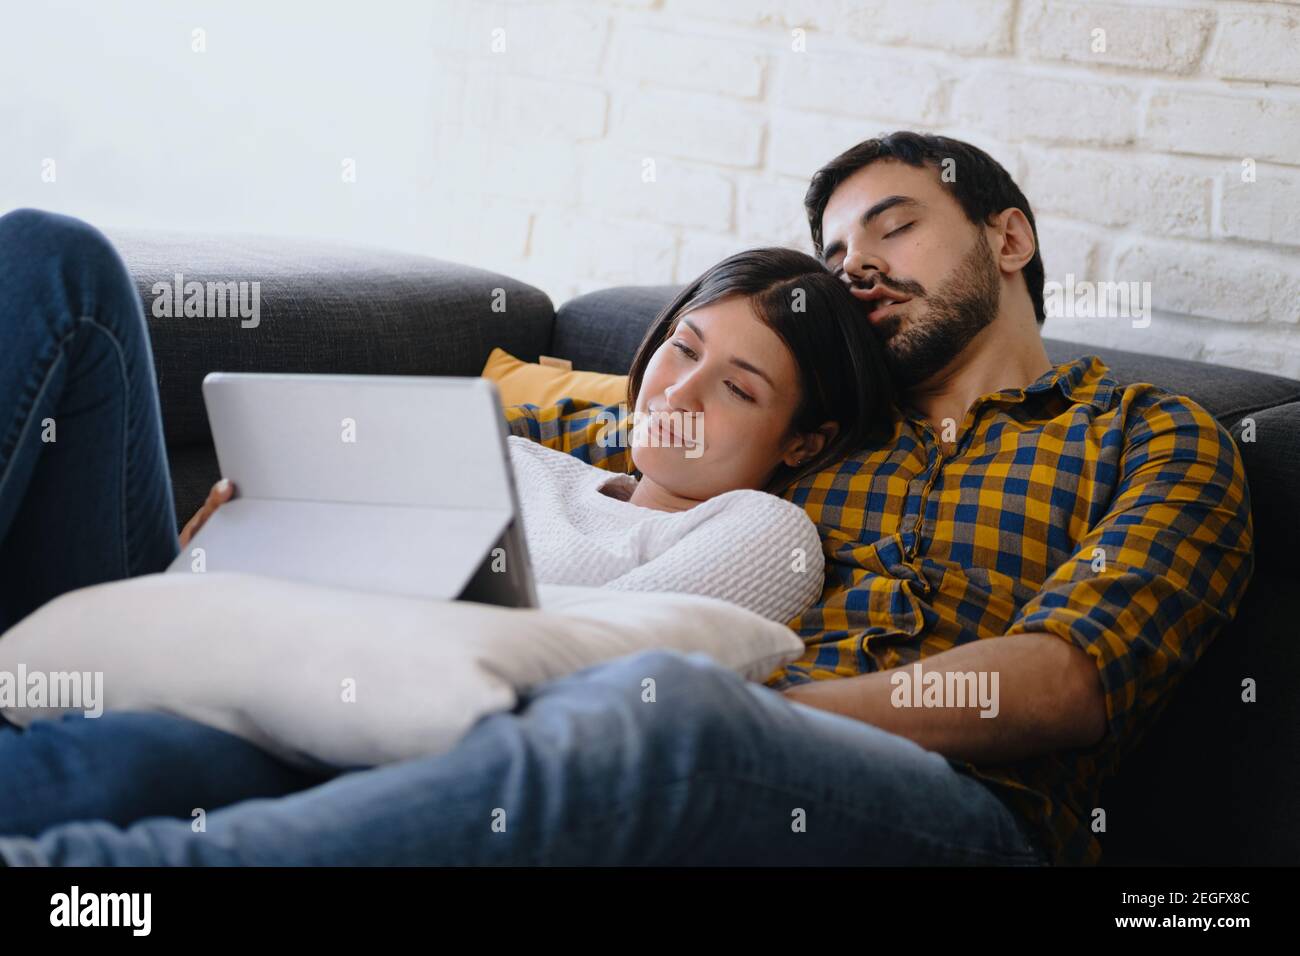 Bored Husband Sleeping While Wife Is Watching Movie Online Stock Photo